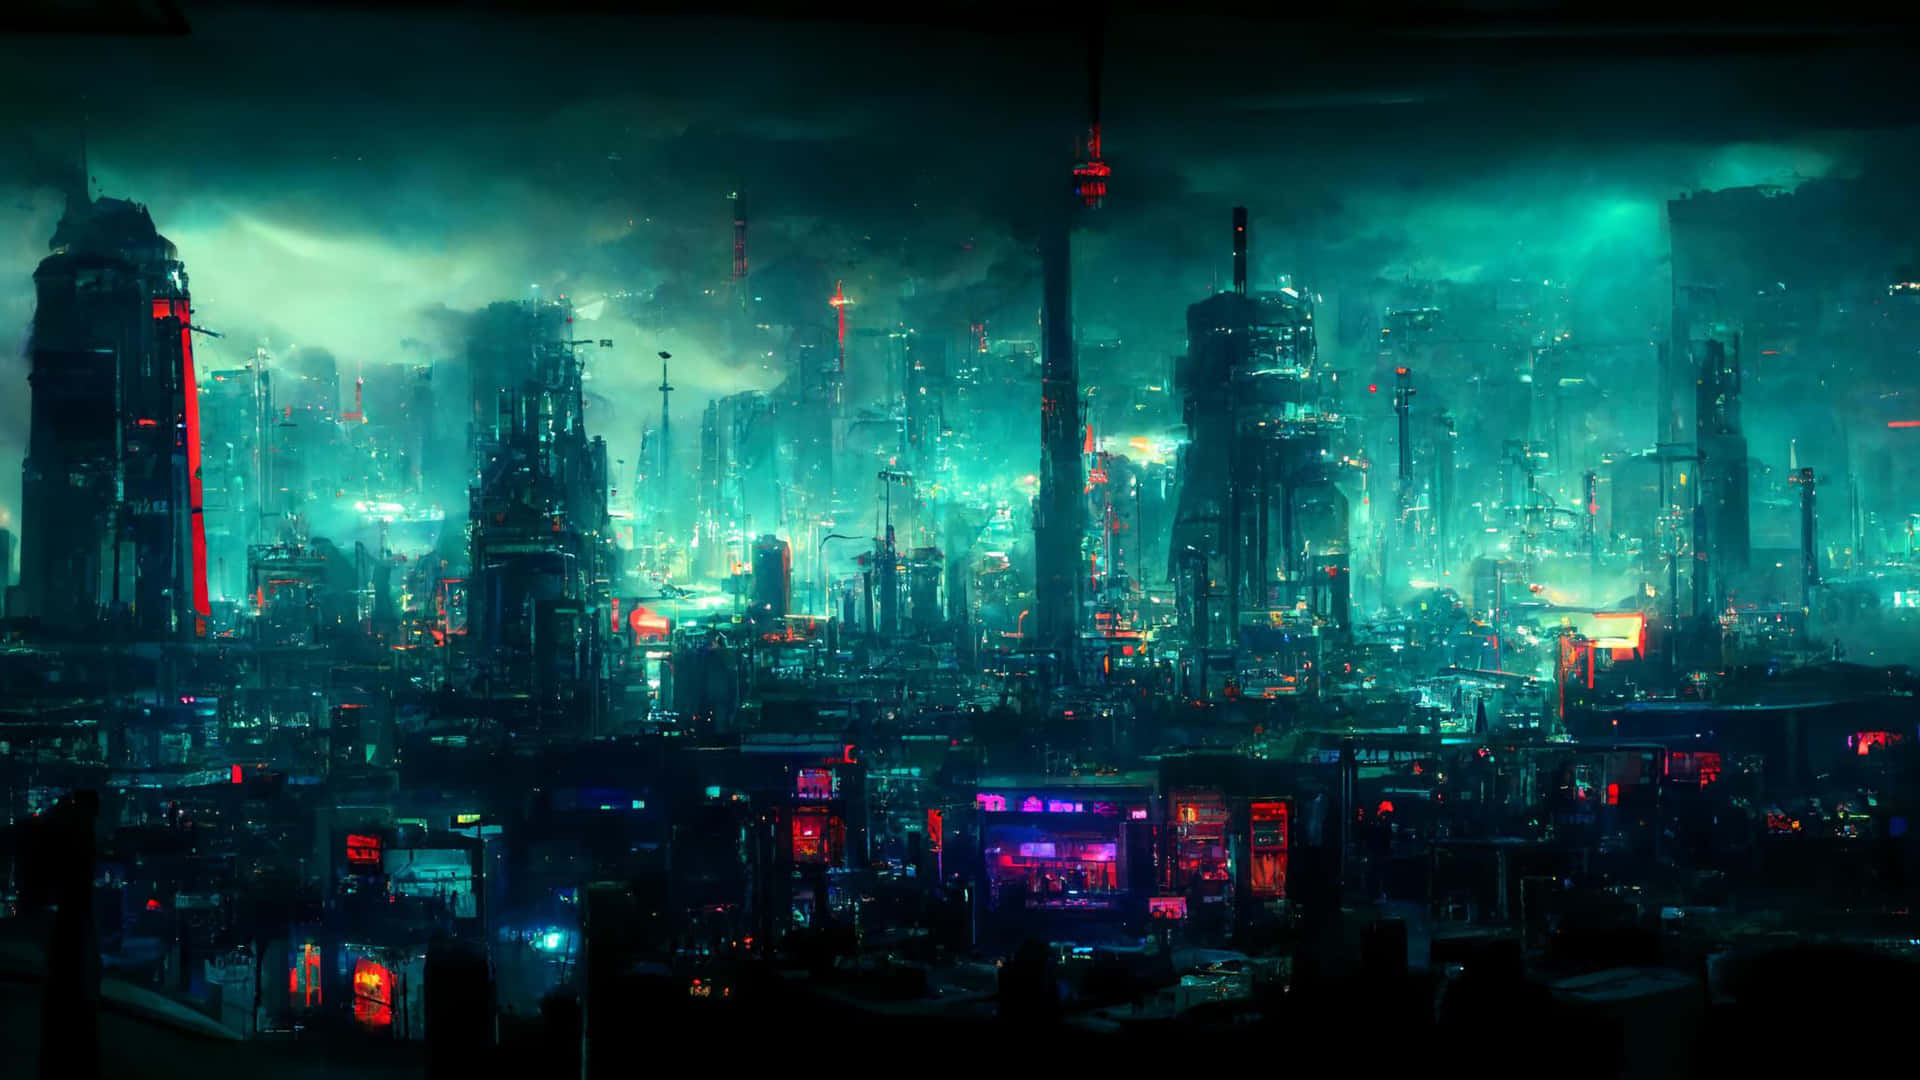 A Futuristic City With Lots Of Lights And Buildings